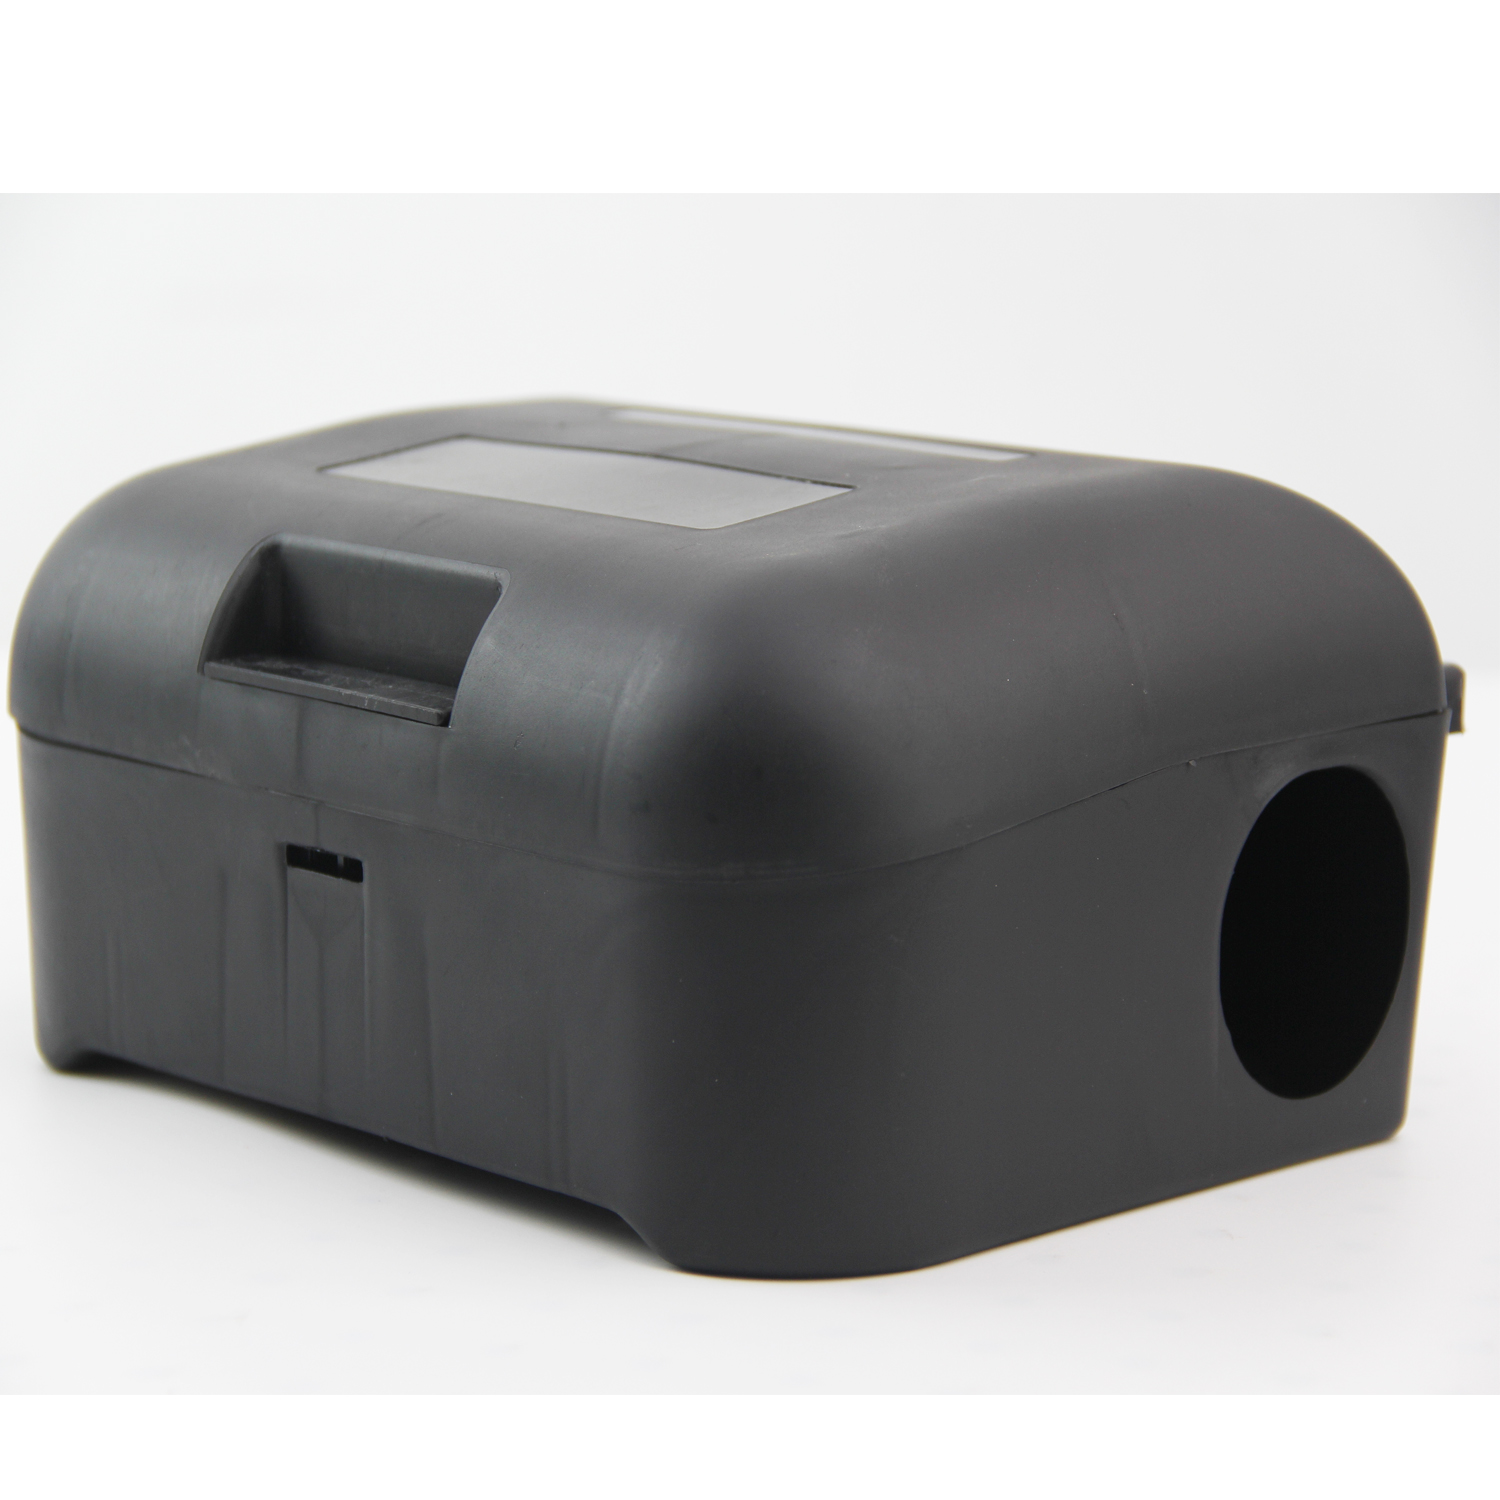 >Haierc Wholesale New Outdoor Rodent Bait Station Mouse & Rat Control Products Keep Children and Pets Safe